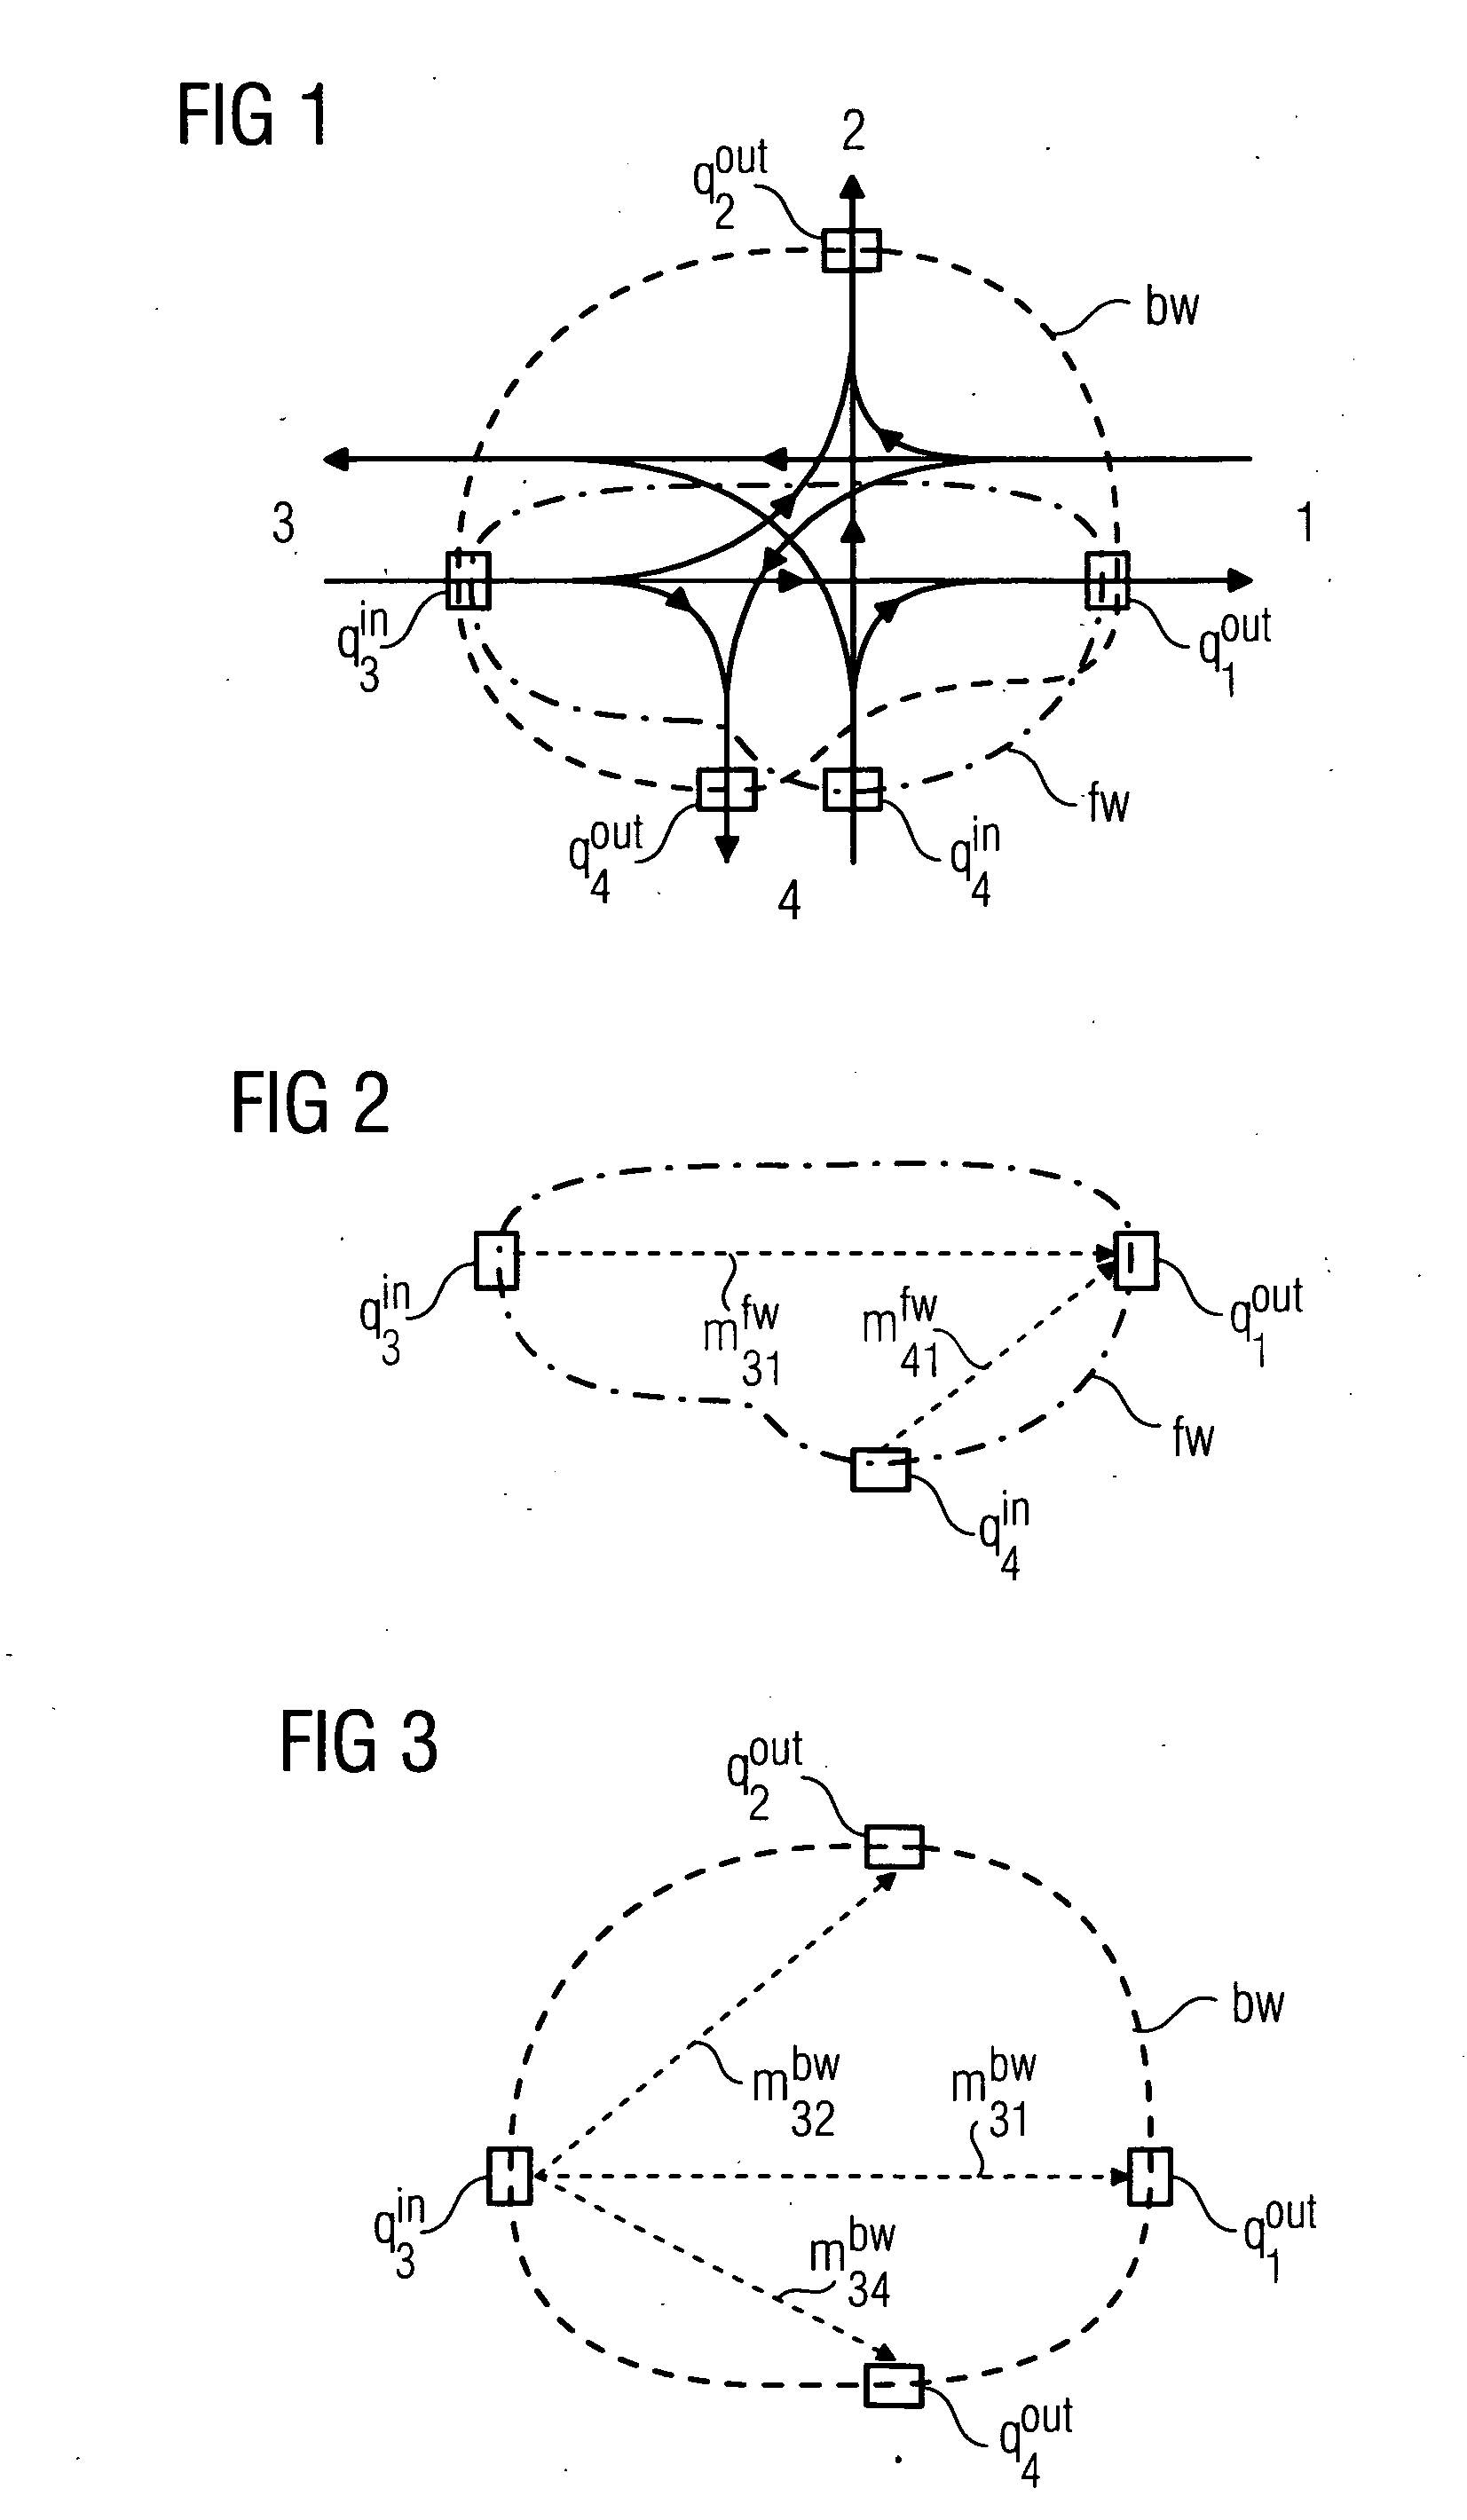 Methods for Determining Turning Rates in a Road Network